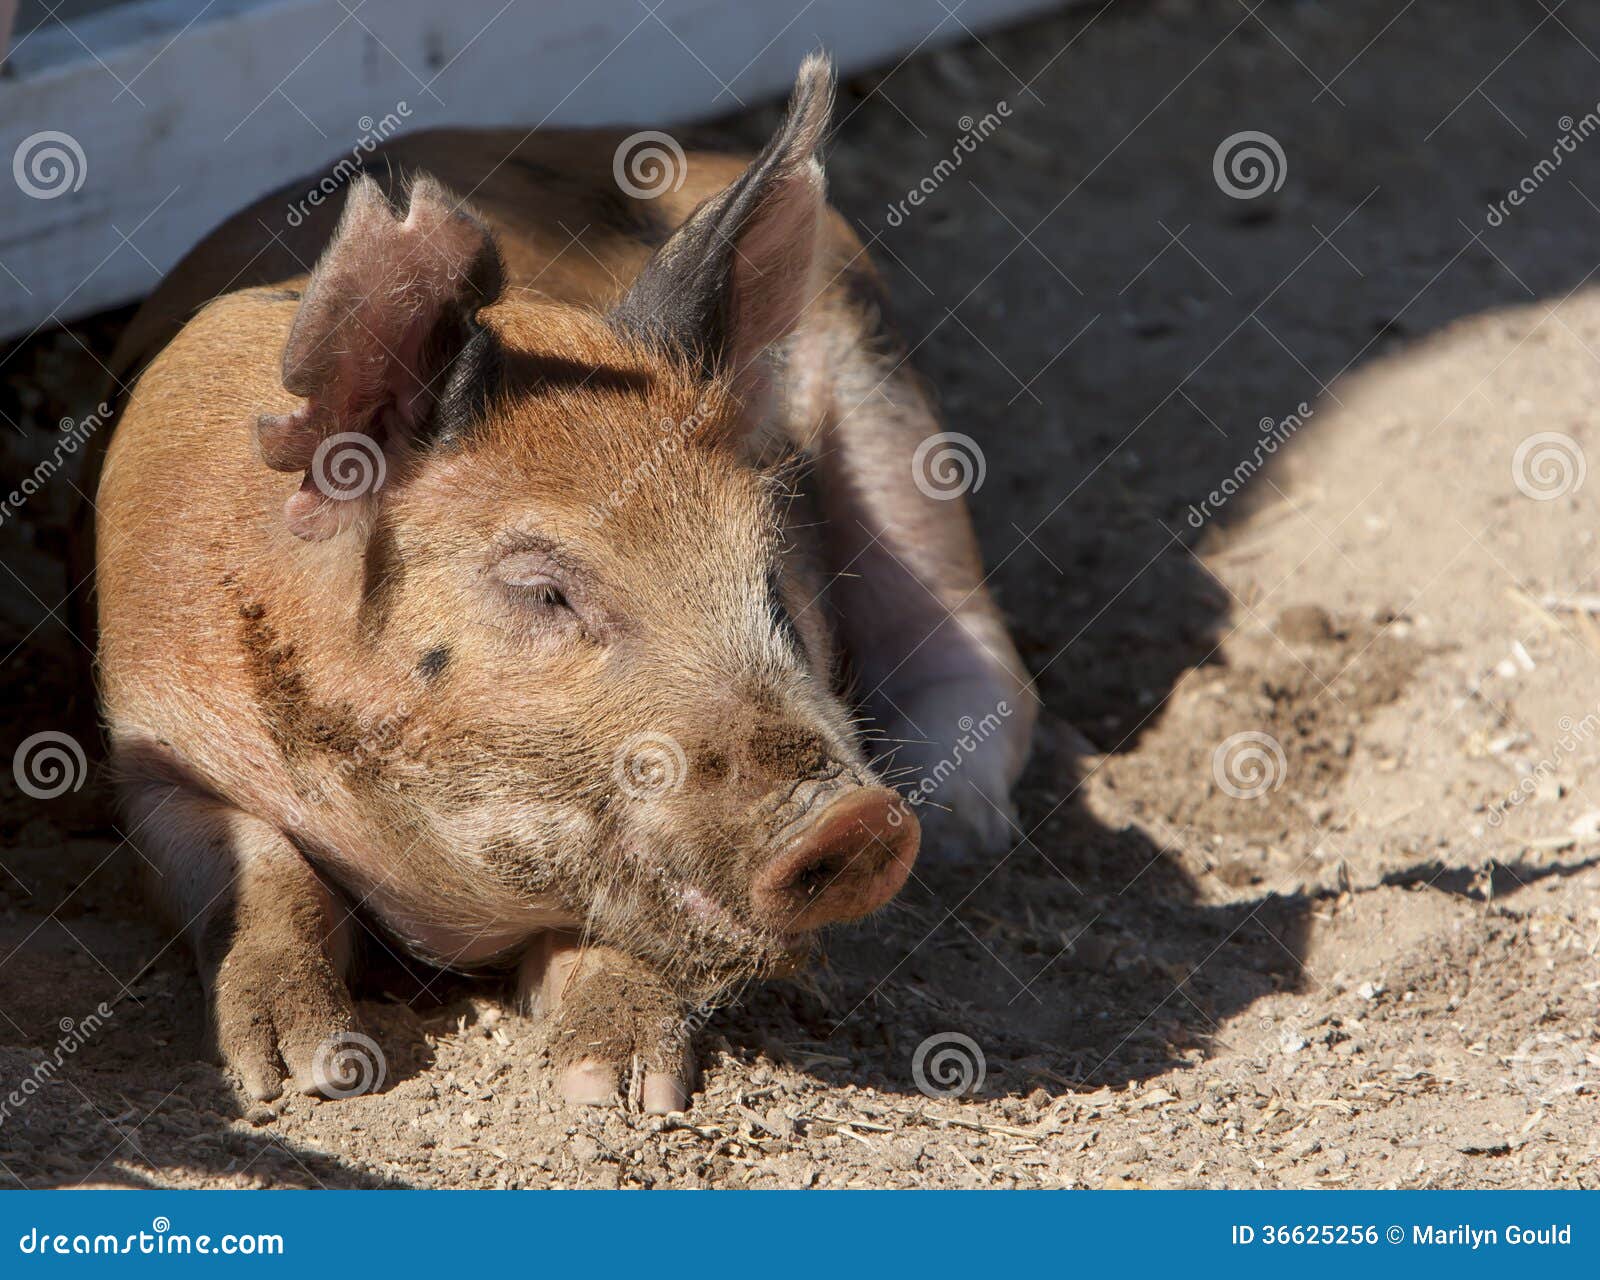 red duroc pig napping